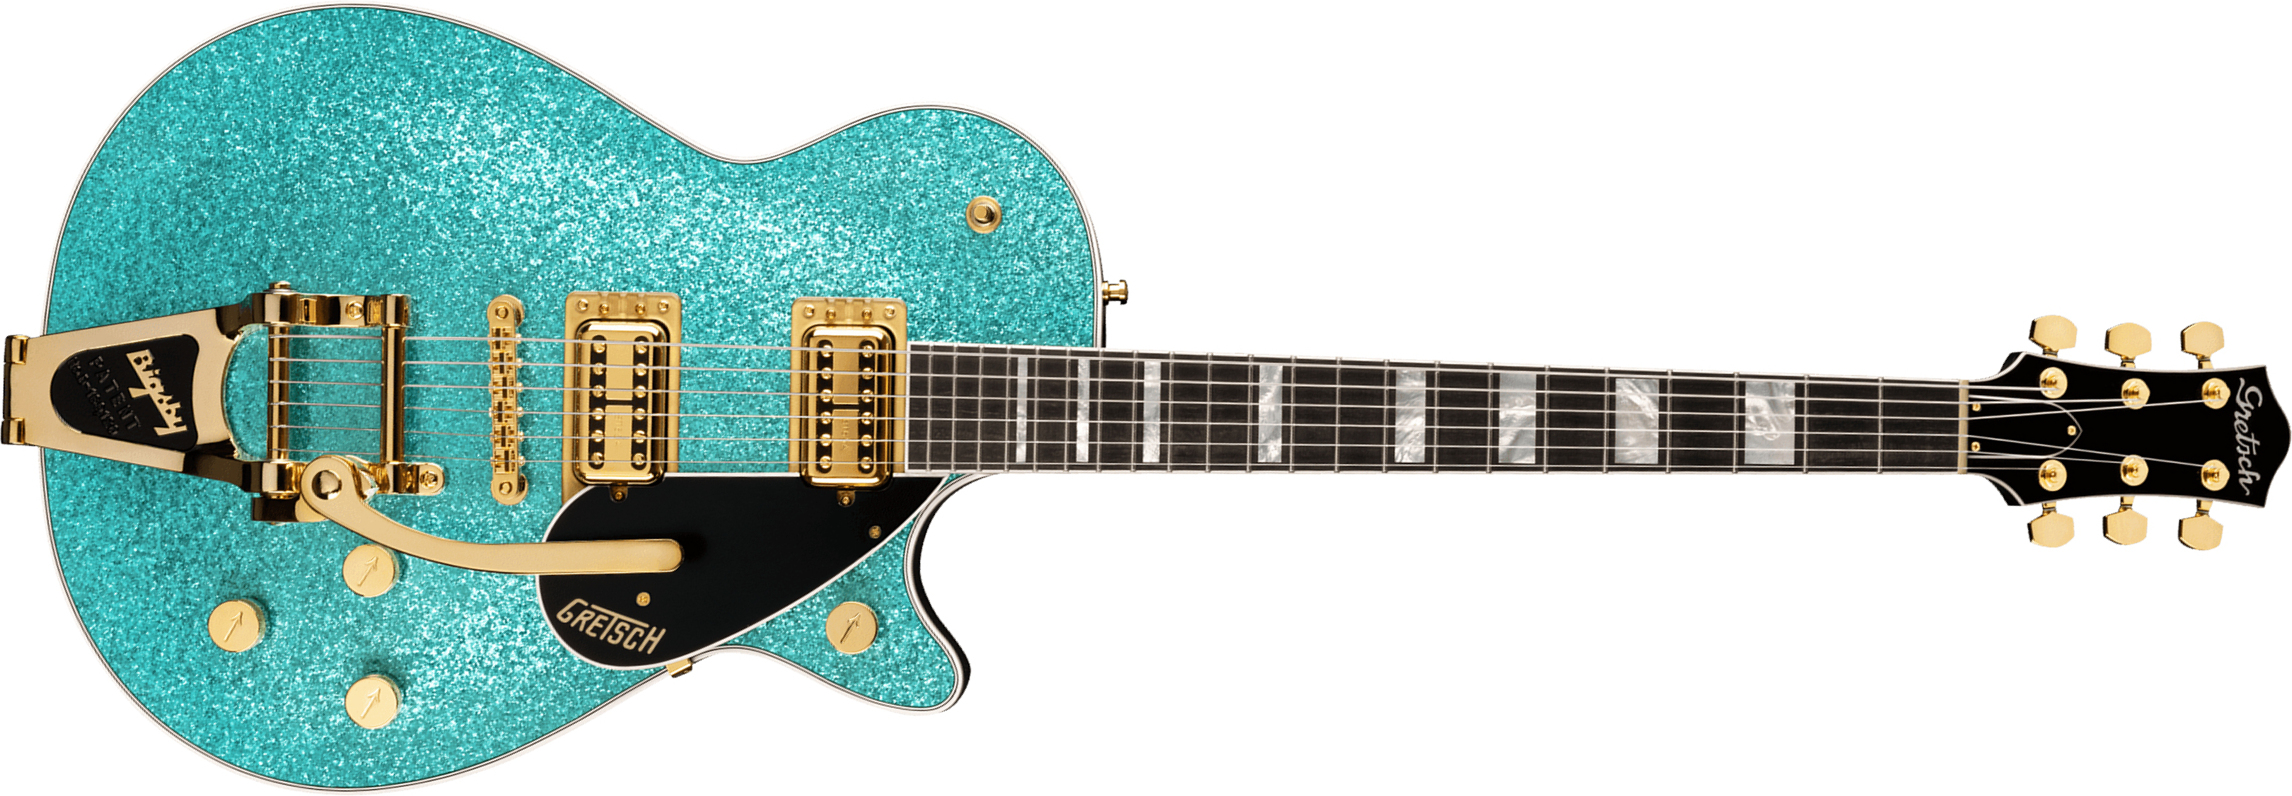 Gretsch G6229tg Jet Bt Players Edition Pro Jap 2h Trem Bigsby Rw - Ocean Turquoise Sparkle - Single cut electric guitar - Main picture